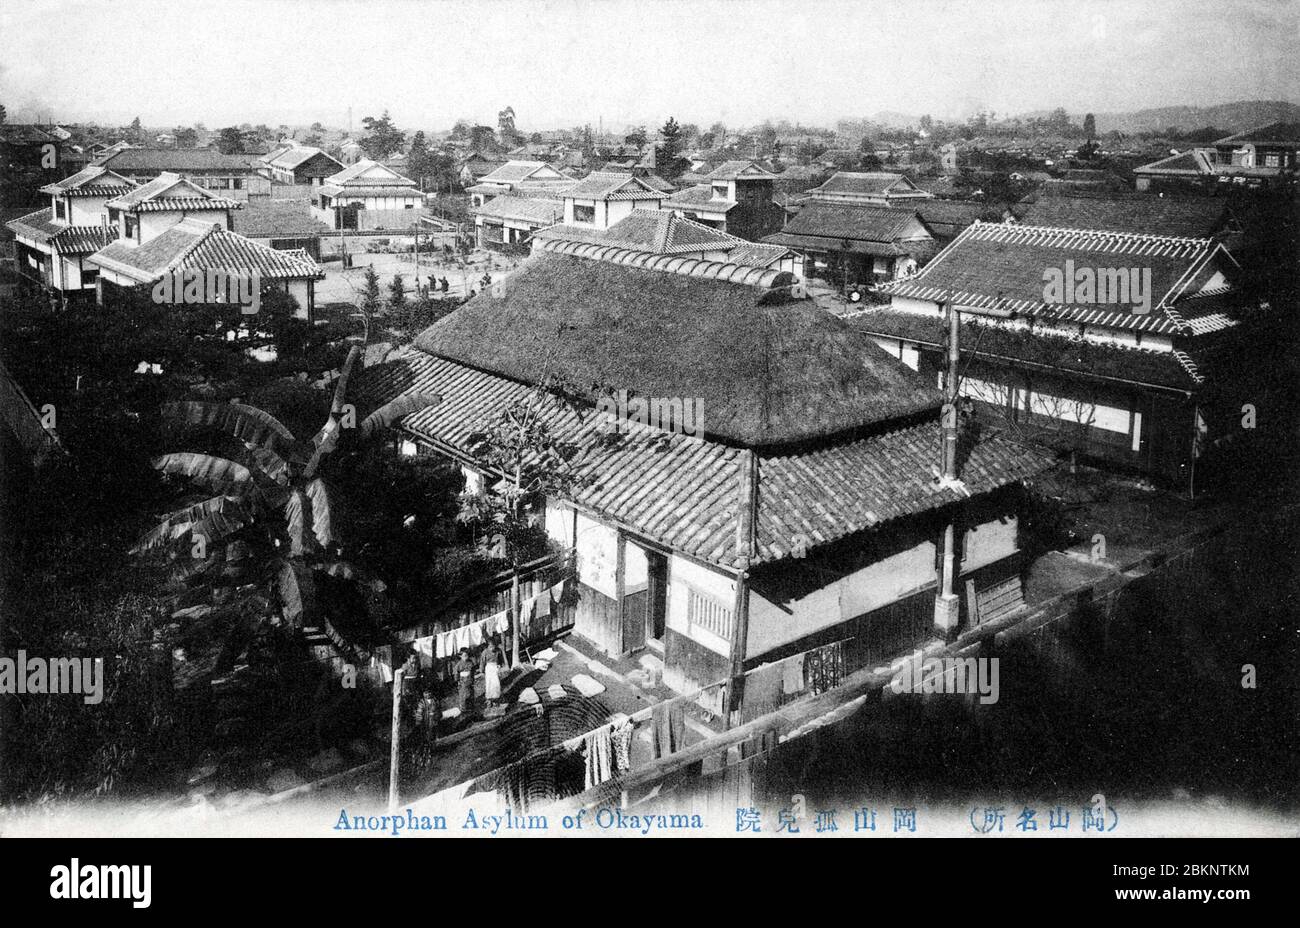 [ 1900s Japan - Japanese Orphanage, Okayama ] —   Okayama Orphanage (岡山孤児院, Okayama Kojiin) in Okayama.  The orphanage was founded by Juji Ishii (石井十次, 1865-1914) in 1887 (Meiji 20) at Sanyuji Temple (三友寺) when Ishii was only 22 years old.  It was one of Japan's first private welfare institutions for children and at its height in 1906 (Meiji 39) cared for 1200 children and employed 200 workers.  20th century vintage postcard. Stock Photo